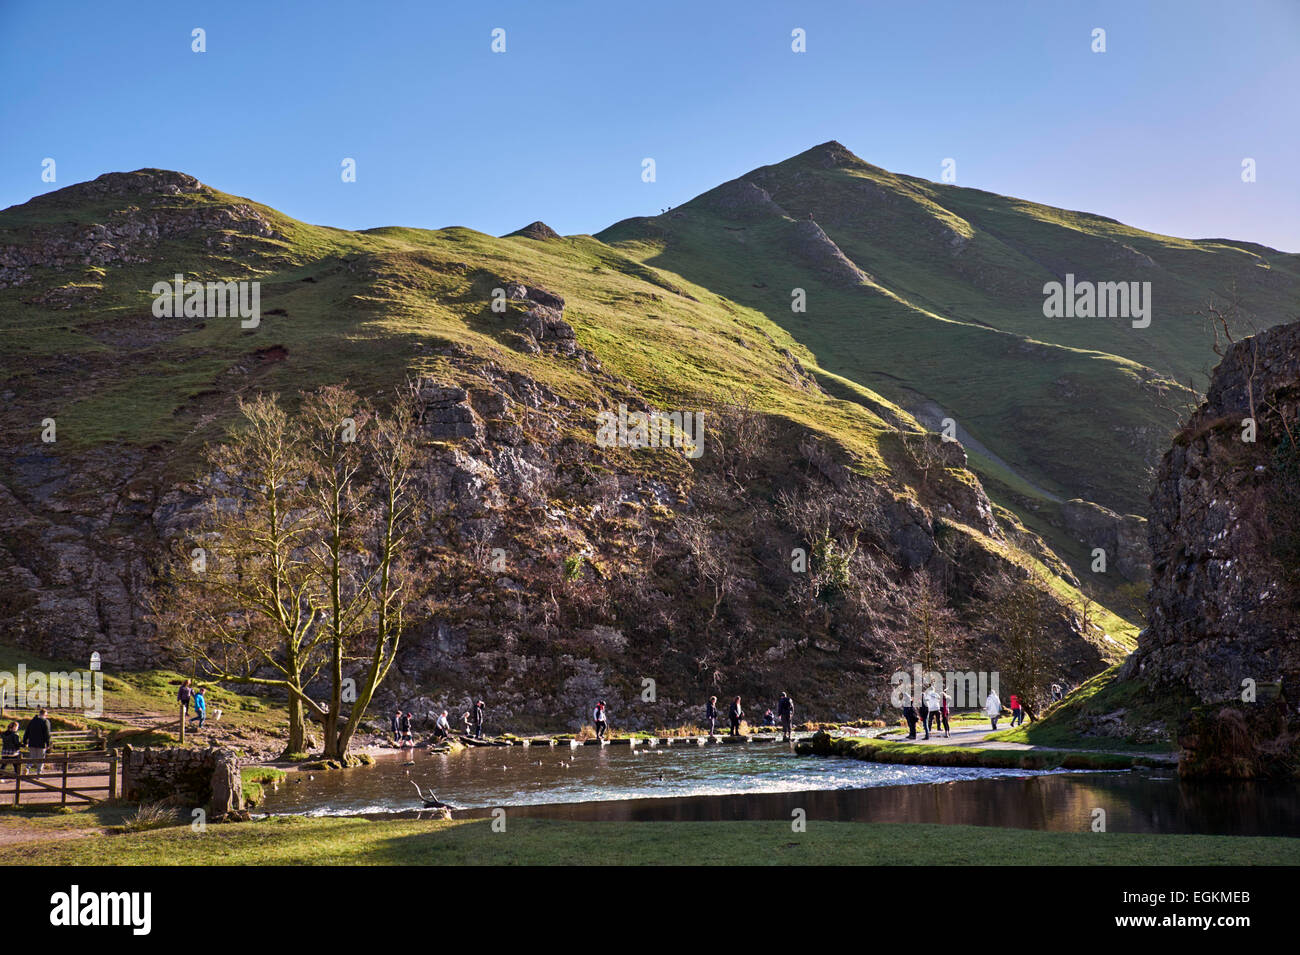 People on the famous Stepping Stones across the River Dove in Dovedale with Thorpe Cloud beyond. Ilam, Derbyshire, England. [Pea Stock Photo